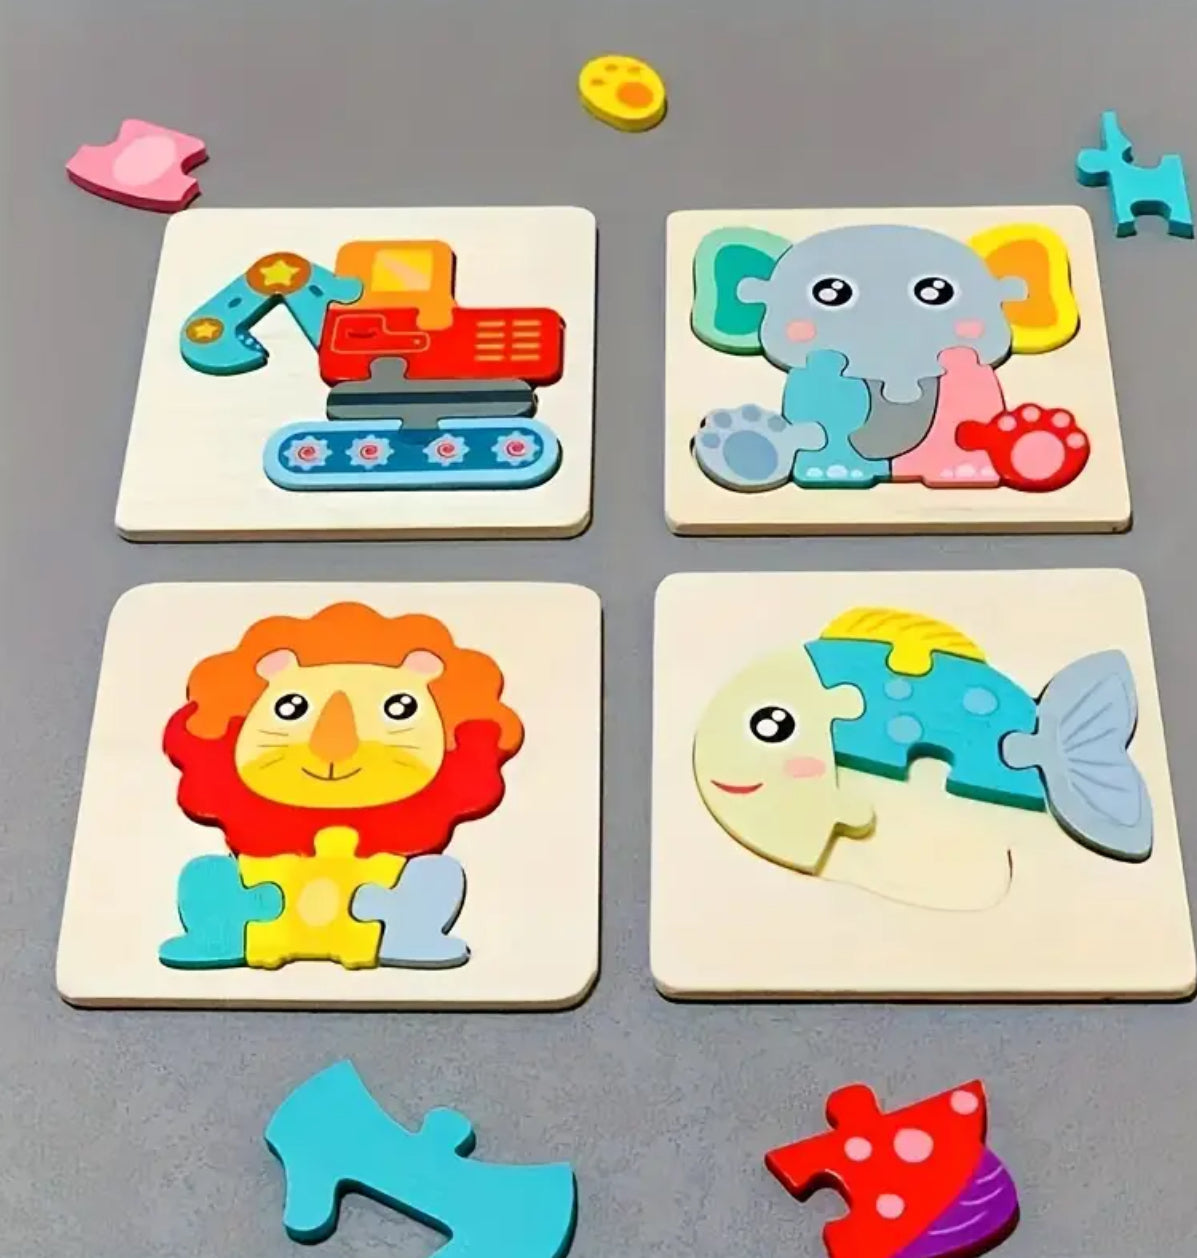 Toddler Puzzle